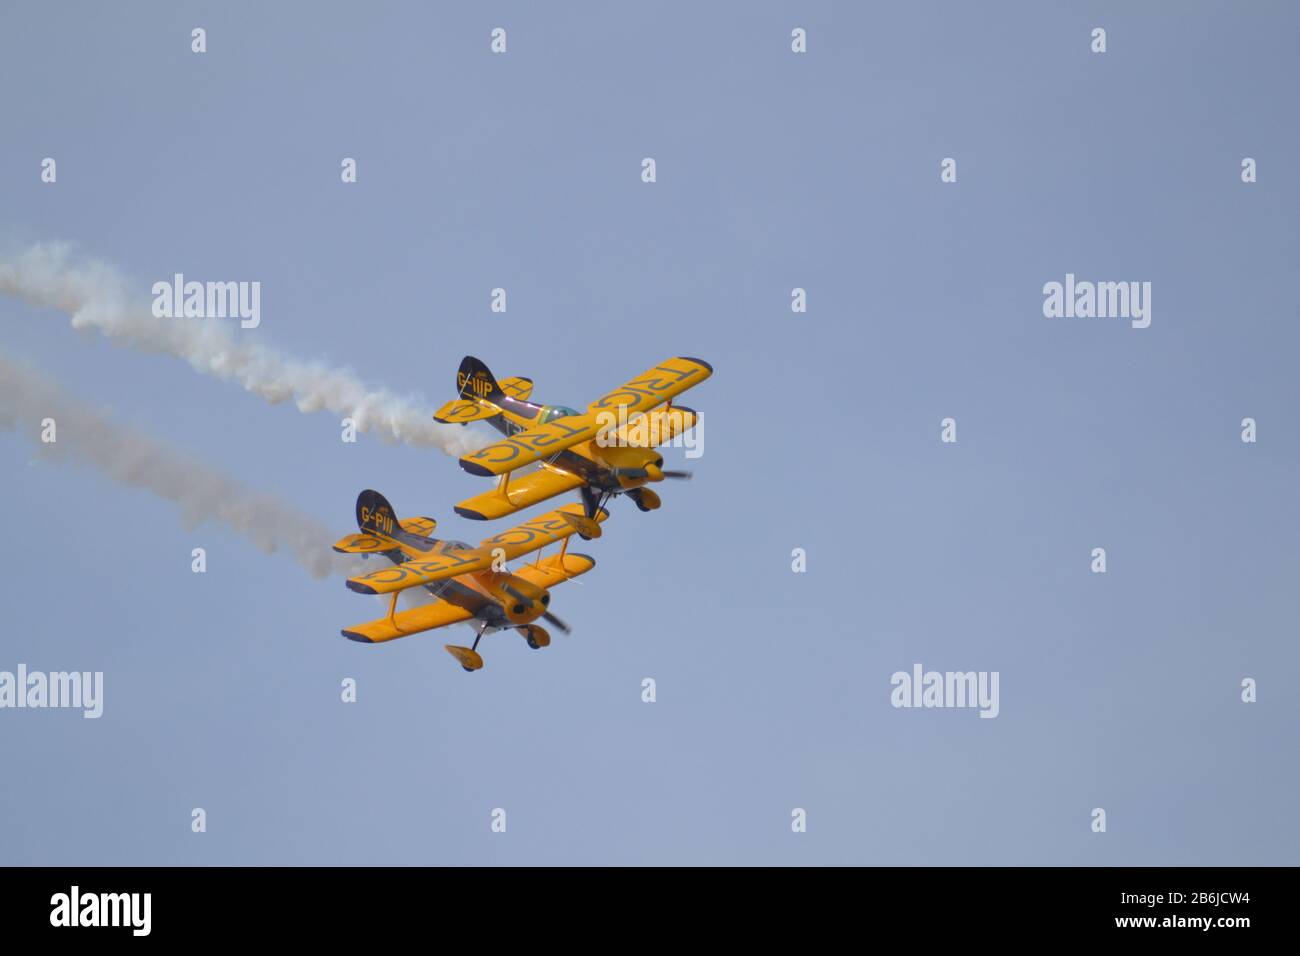 Trig Display Team Au Southport Airshow. Banque D'Images